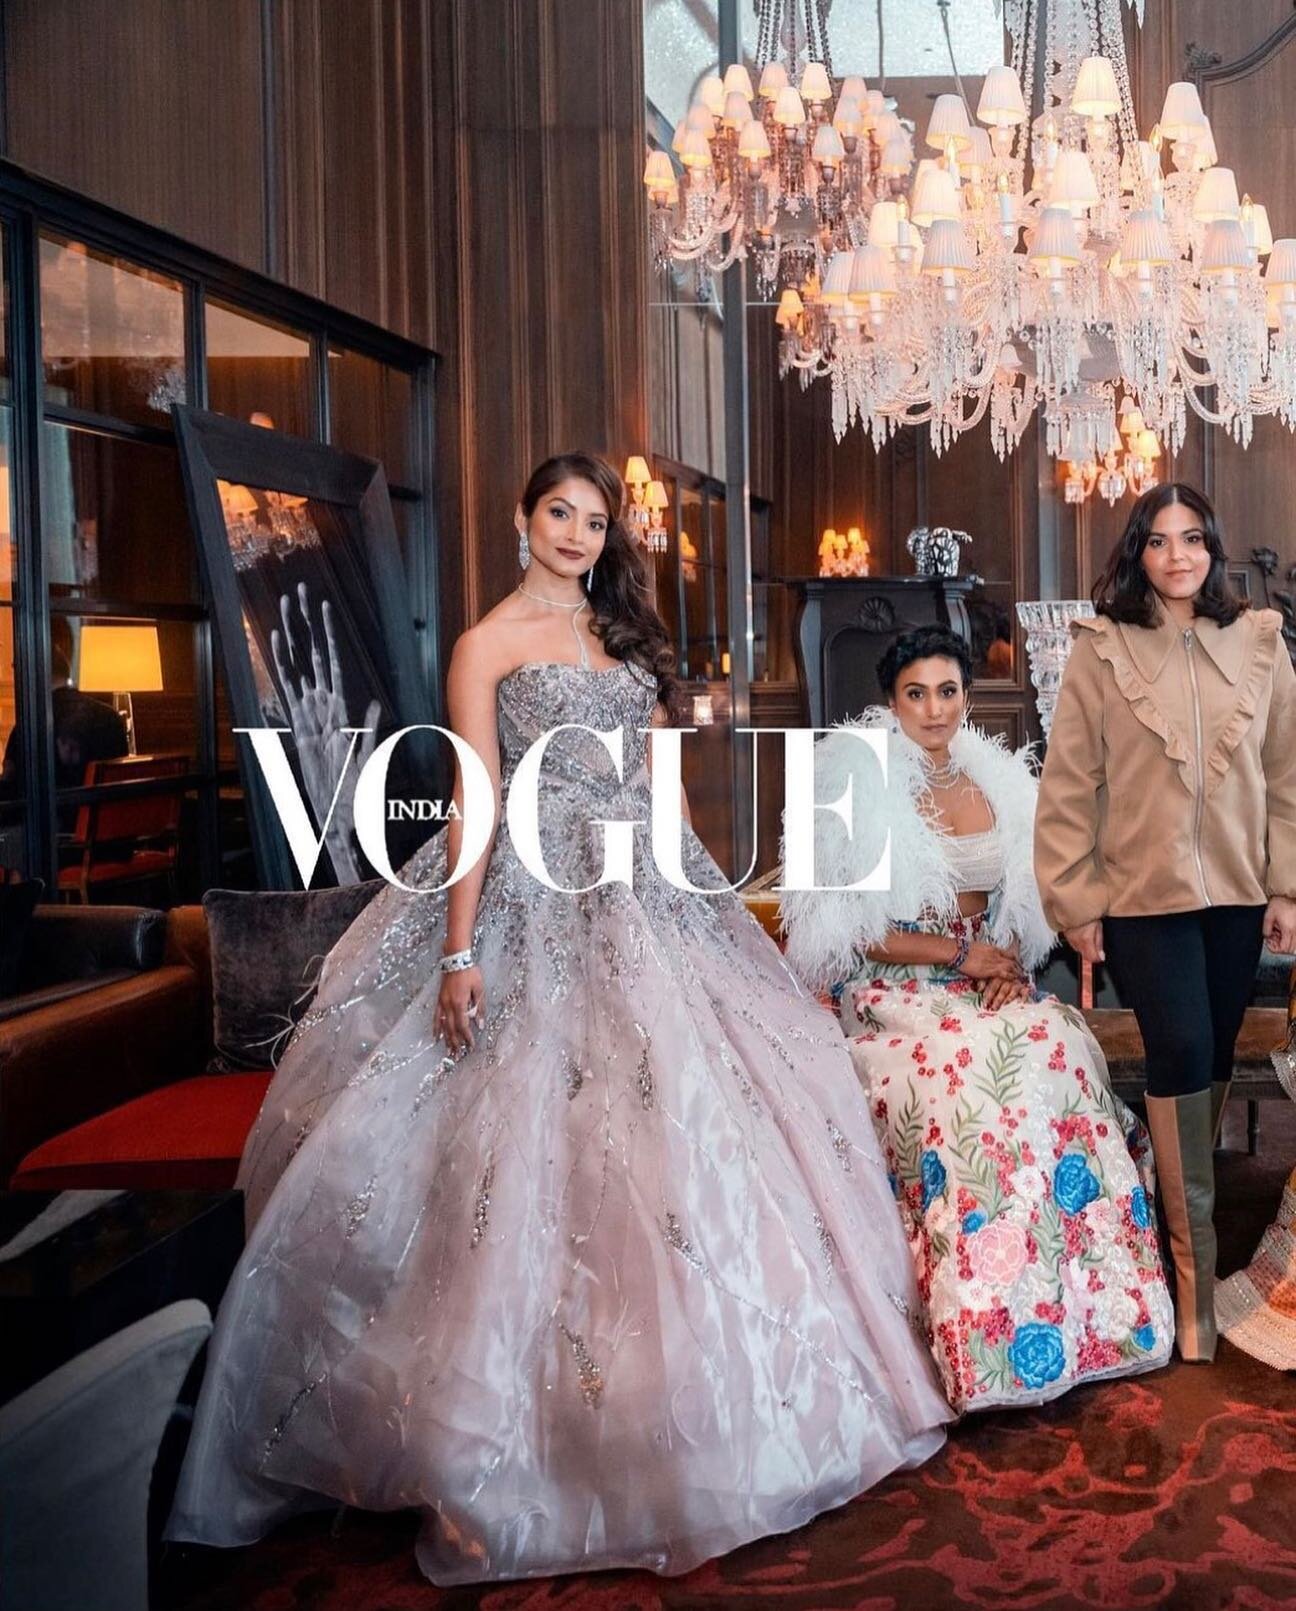 Thank you @vogueindia 🙏🏽 

Truly honored to be featured as one of the Top 5 Achievers on International Day @indiaspopup ✨

Venue:&nbsp;@baccarathotels 
PR and Shoot Production:&nbsp;@patelneerja Photographer:&nbsp;@saunakspace 
Videographer:&nbsp;@